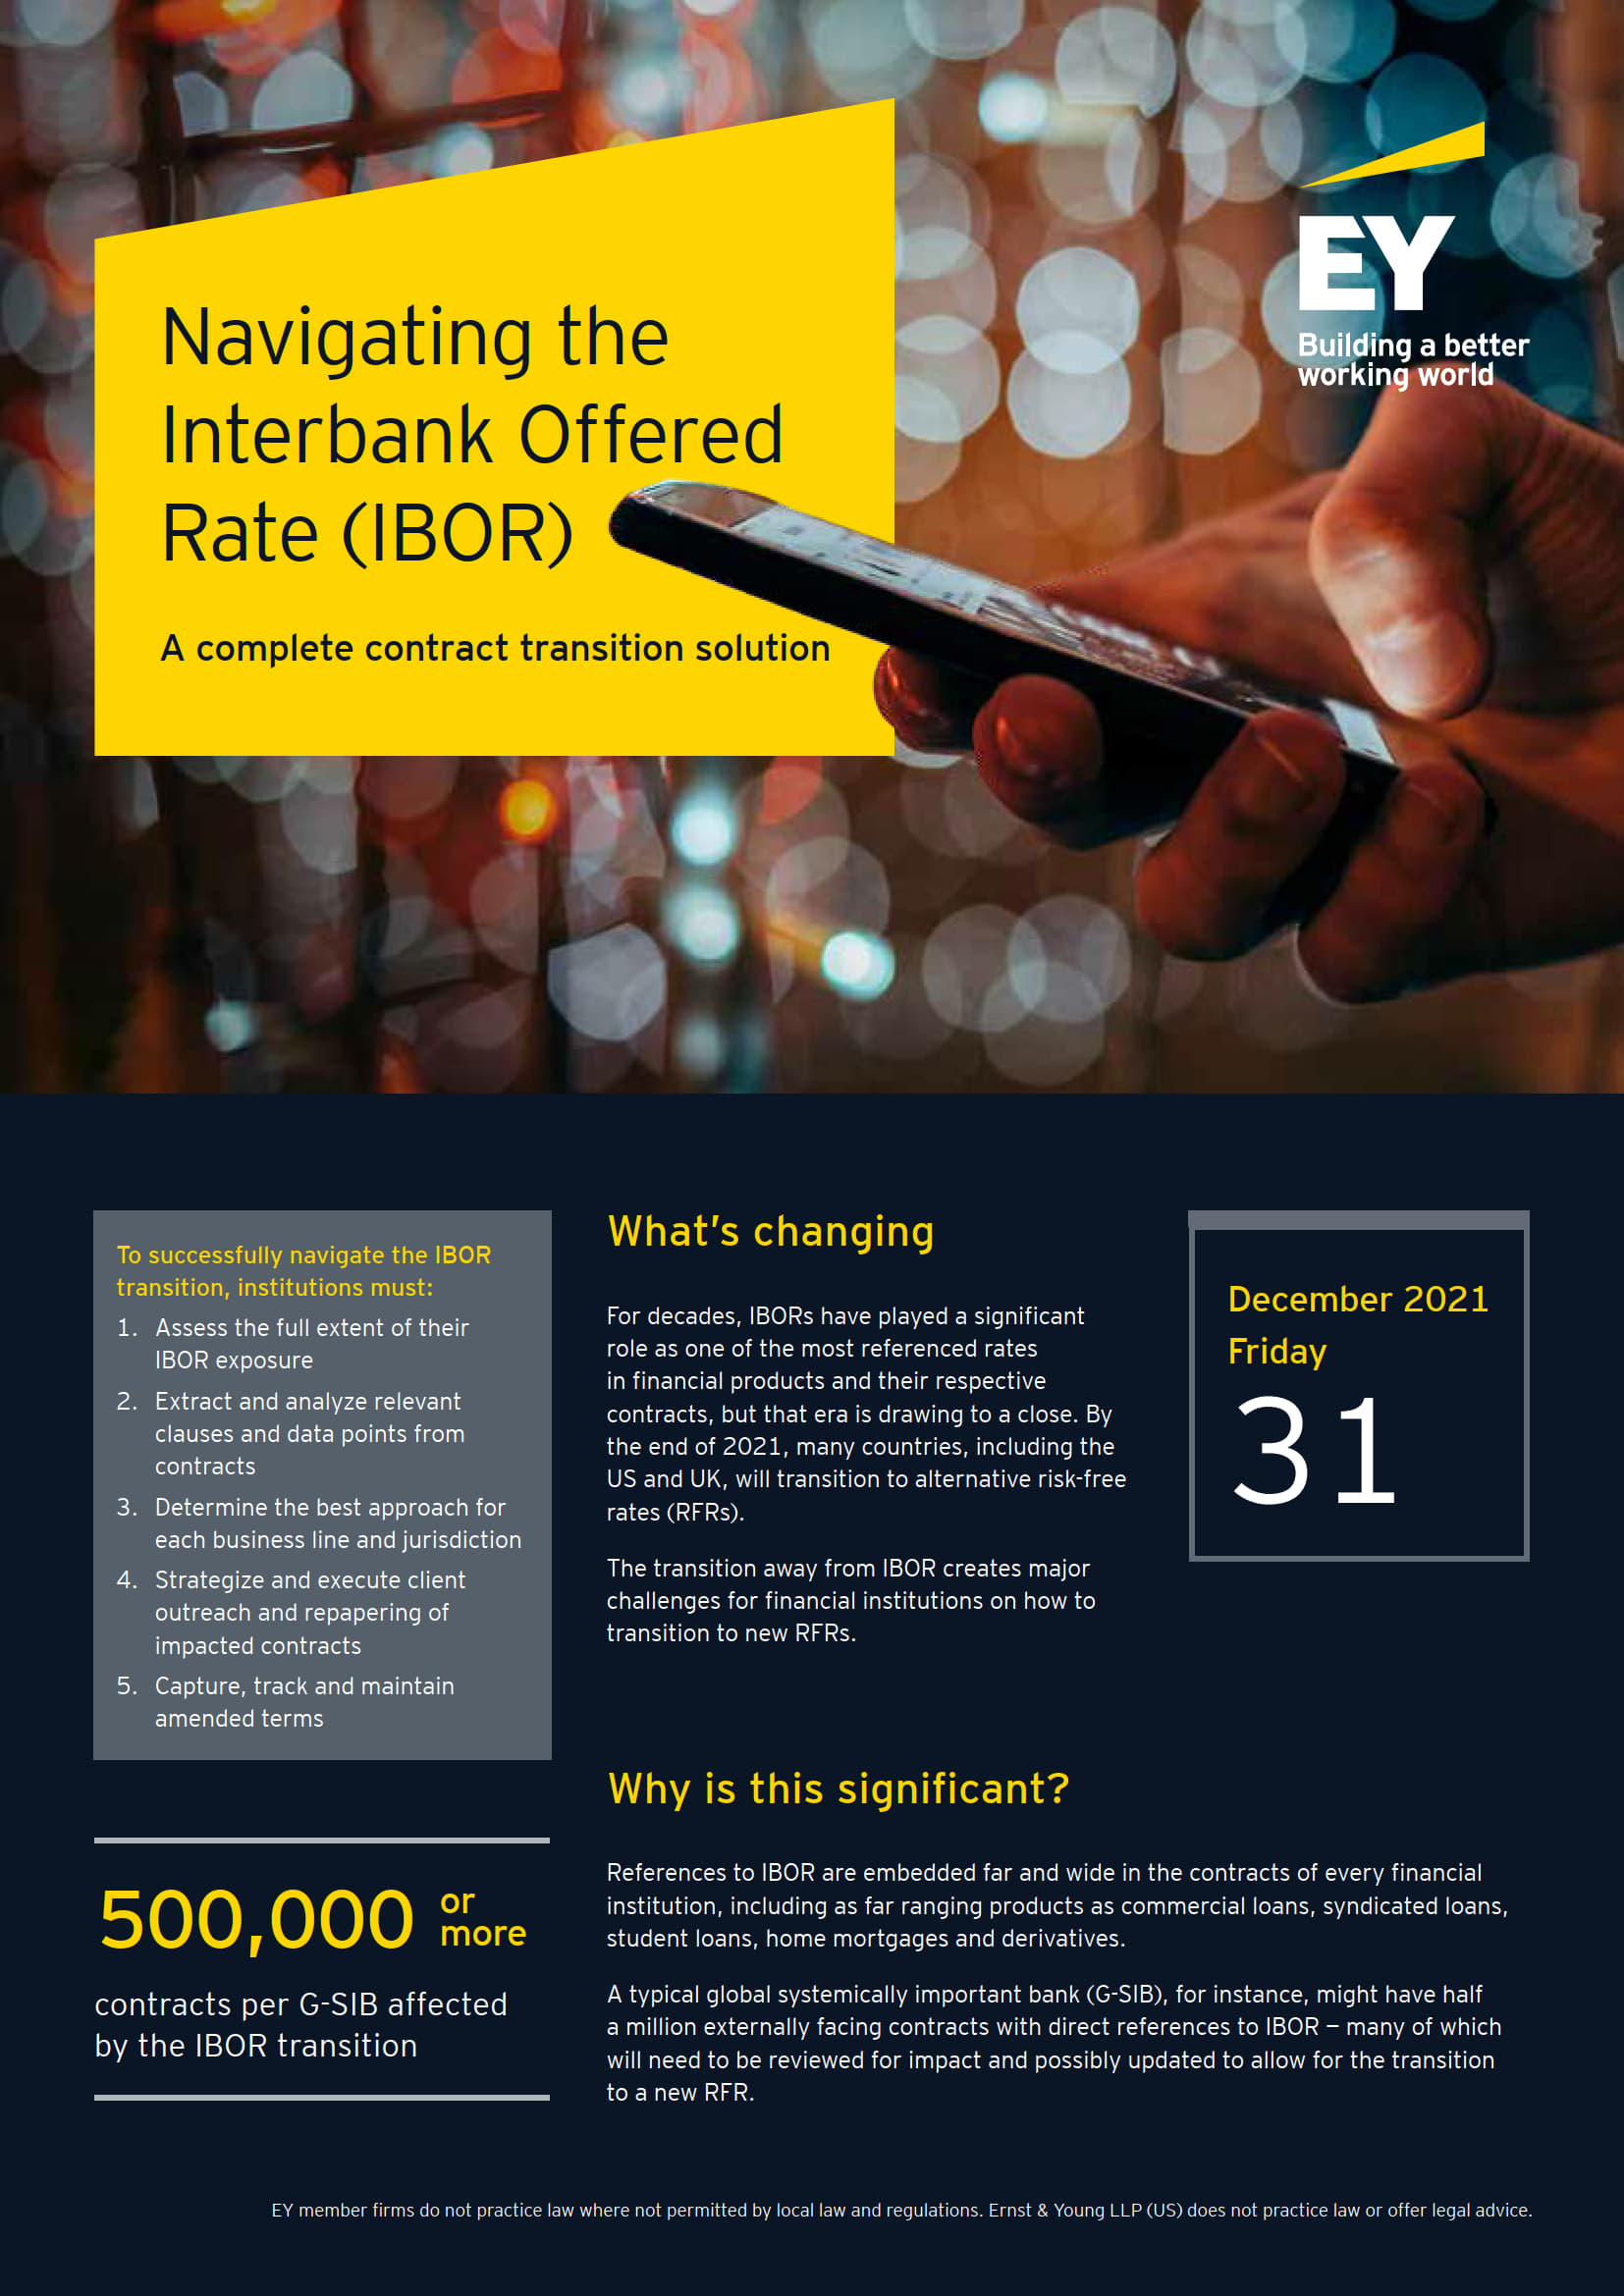 Navigating the Interbank Offered Rate (IBOR) – A complete contract transition solution, 31 December 2021